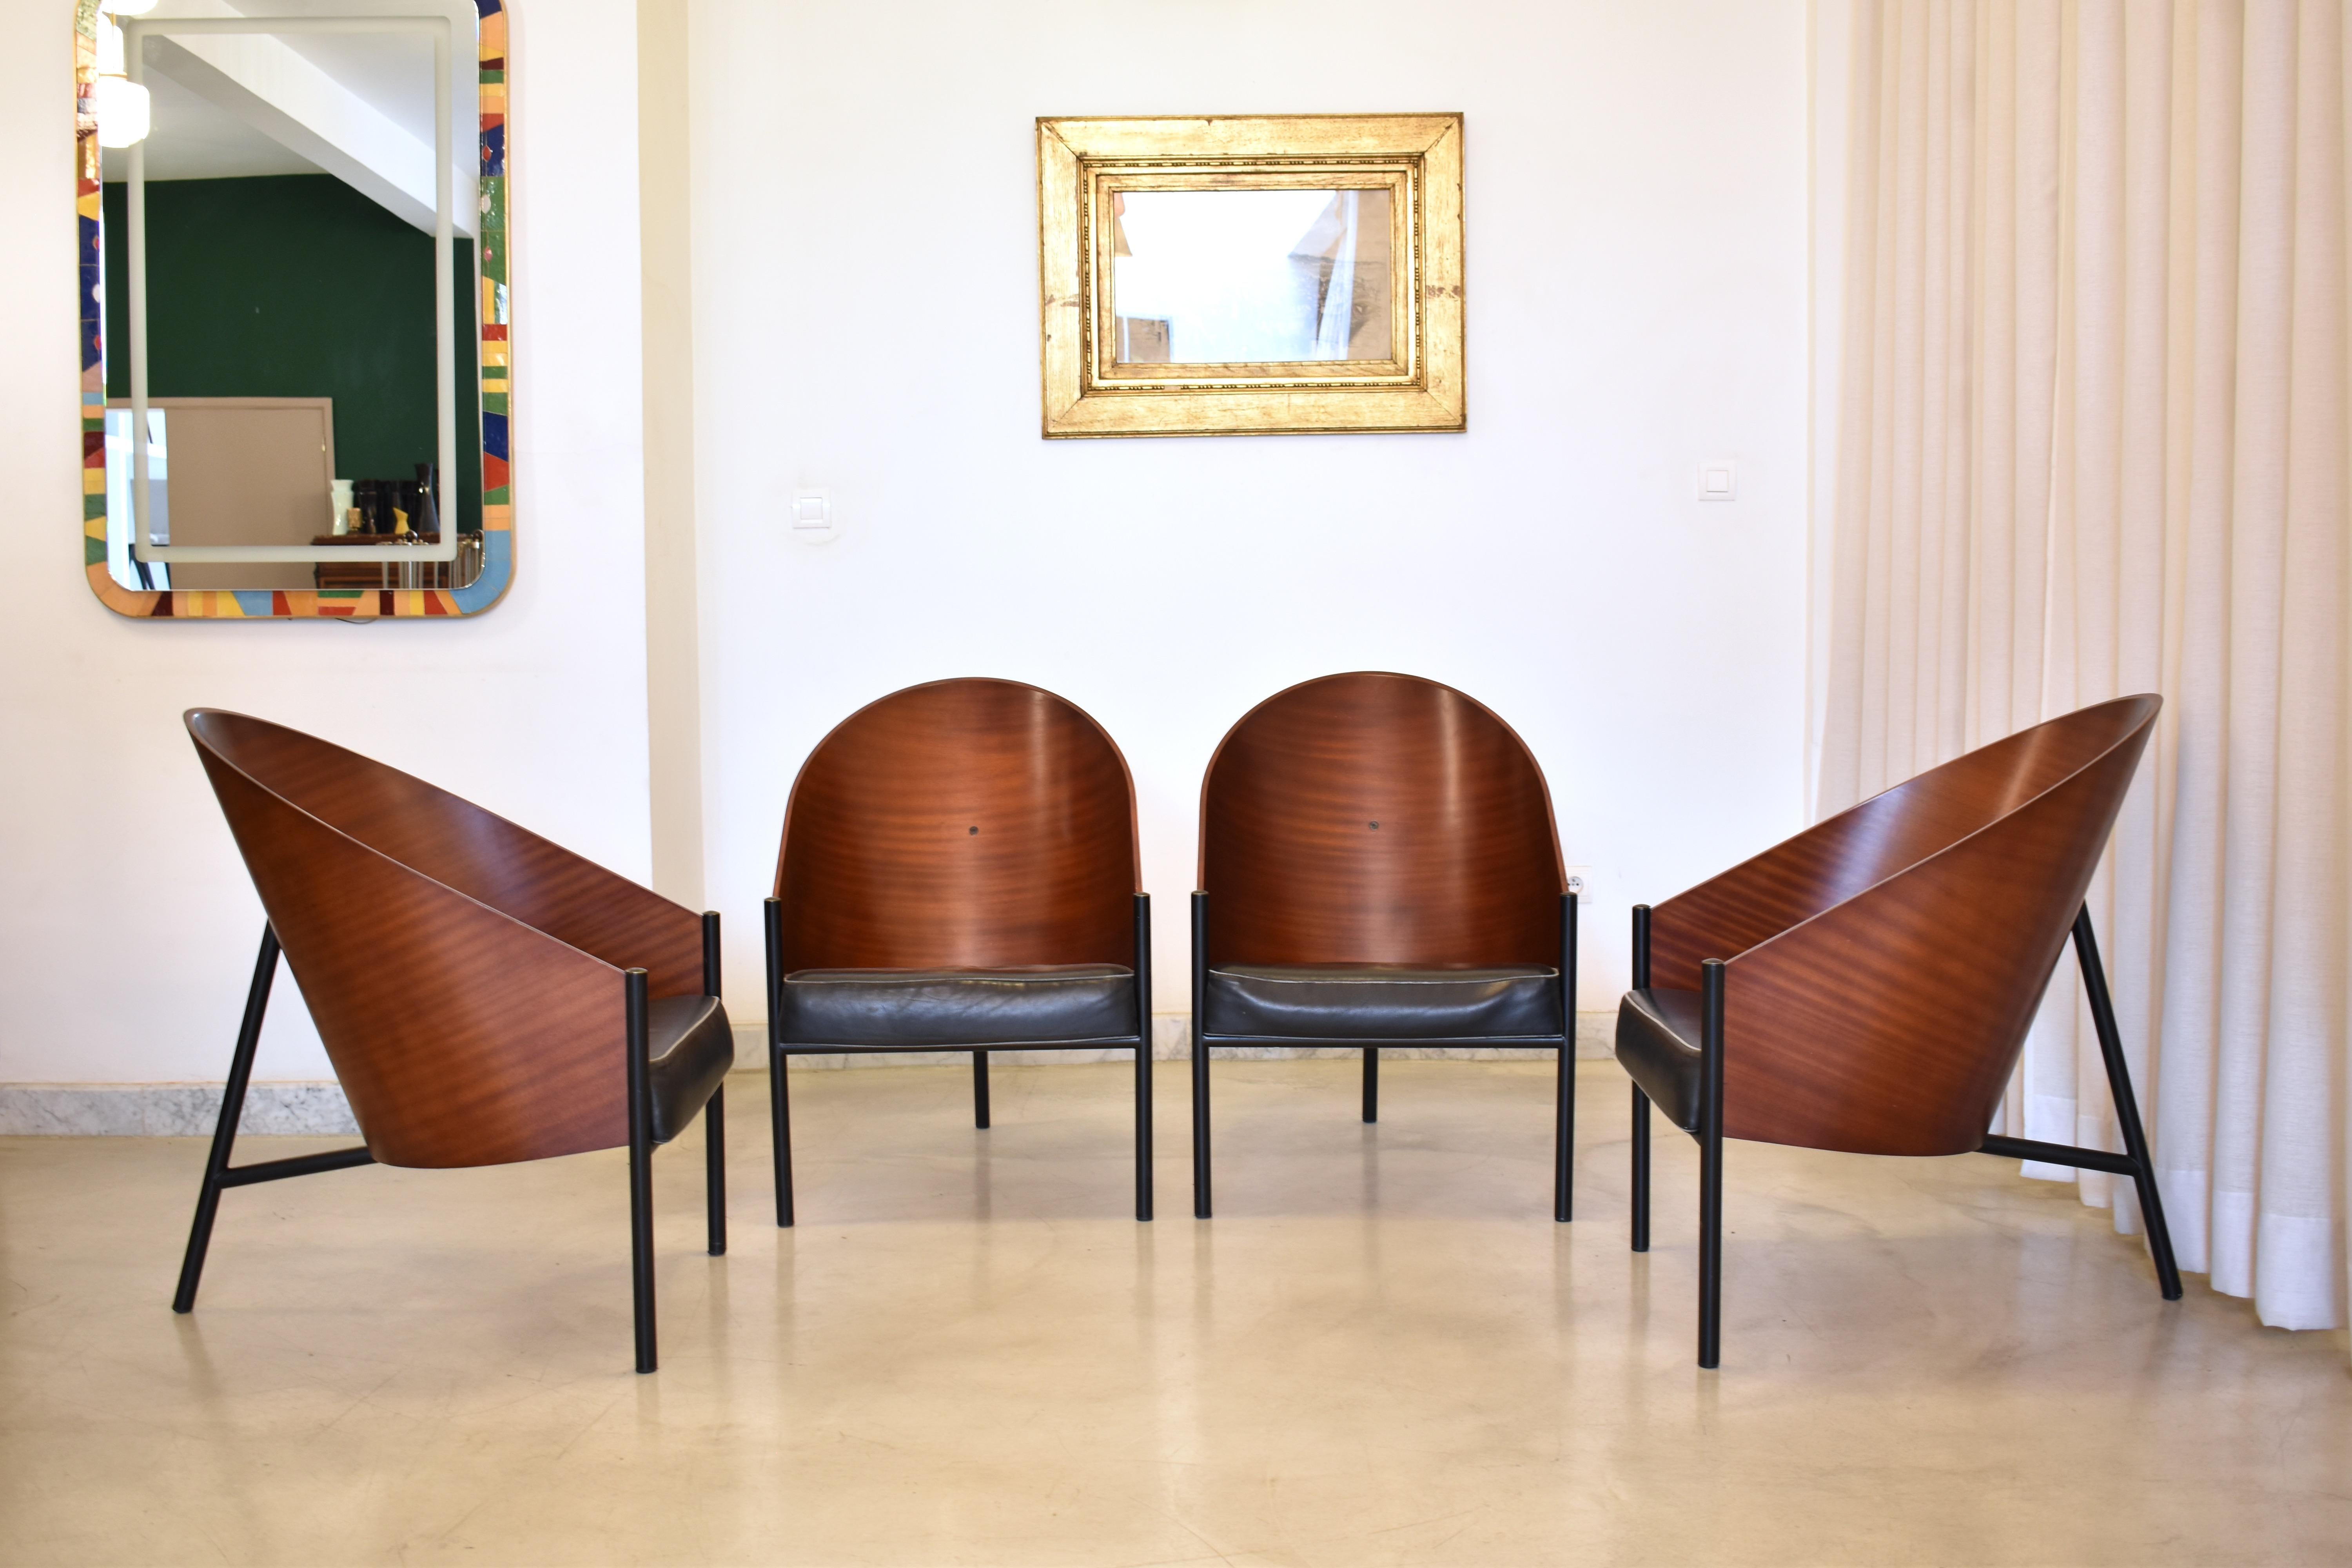 Italian Set of Four Philippe Starck Armchairs, 1st Ed., Pratfall for Driade, Italy, 1984 For Sale